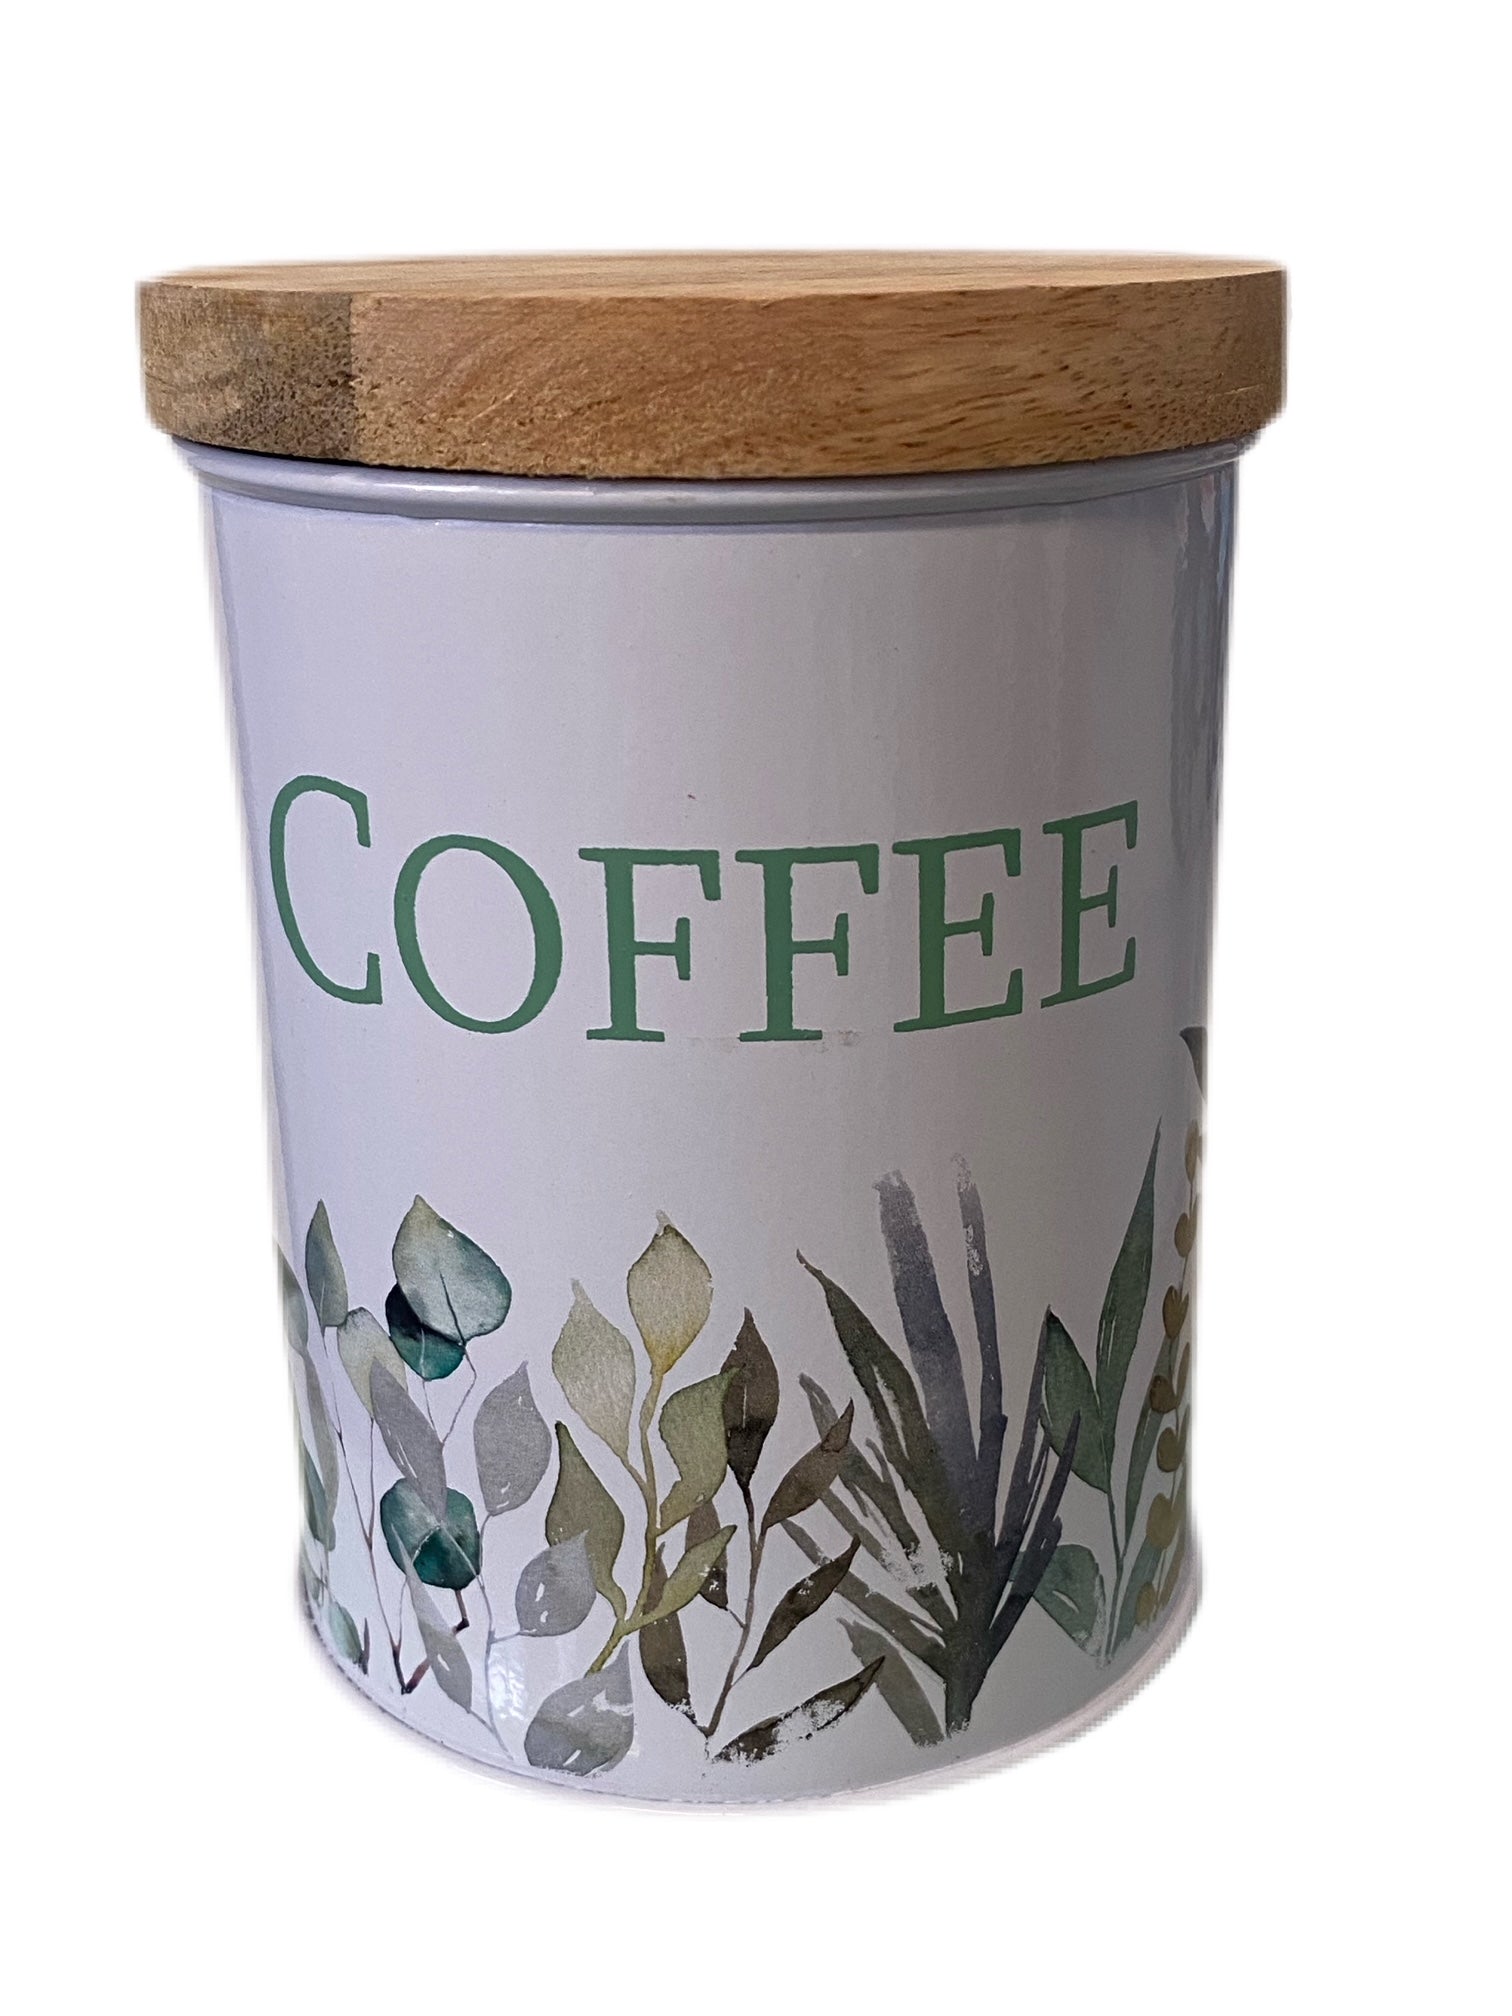 Olive Grove Printed Metal Storage cannister with Wooden Lid - Coffee - The Cooks Cupboard Ltd